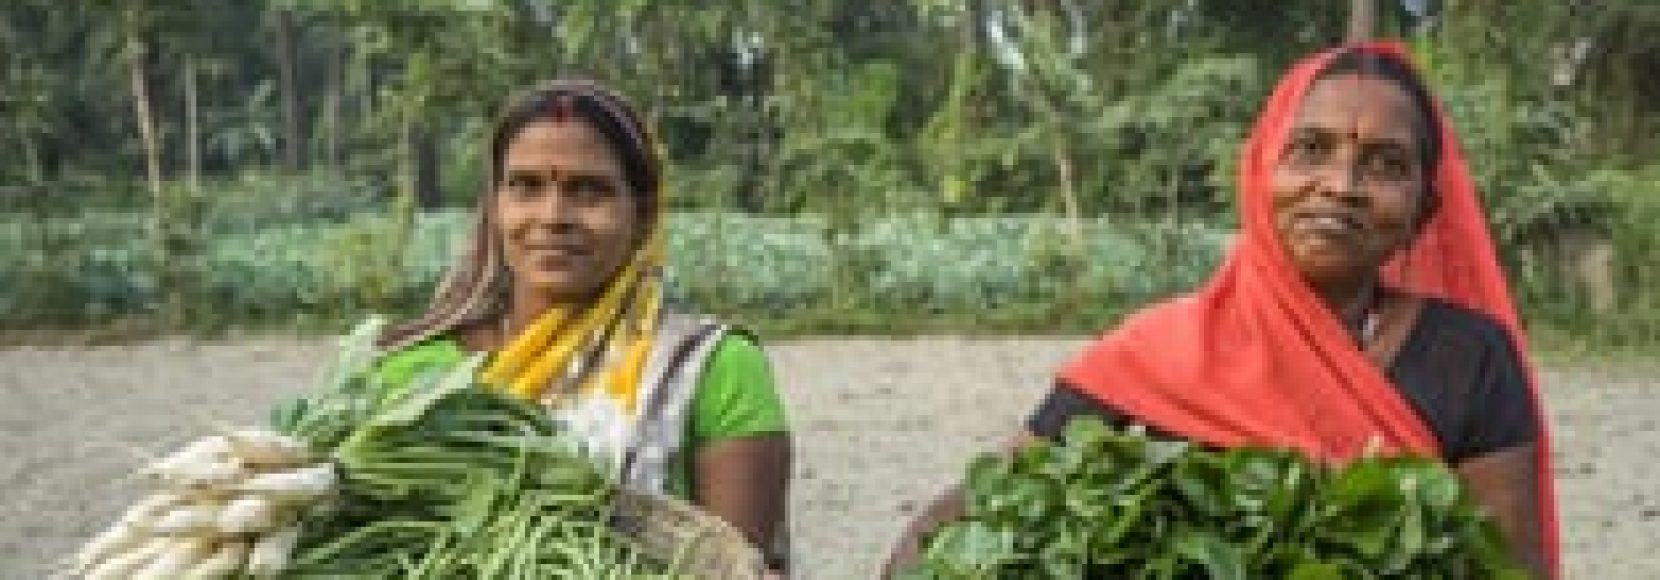 Vegetable farmers Bindu Devi and Macho Devi, members of a Farmer's Producer Group, carry their vegetables in a basket